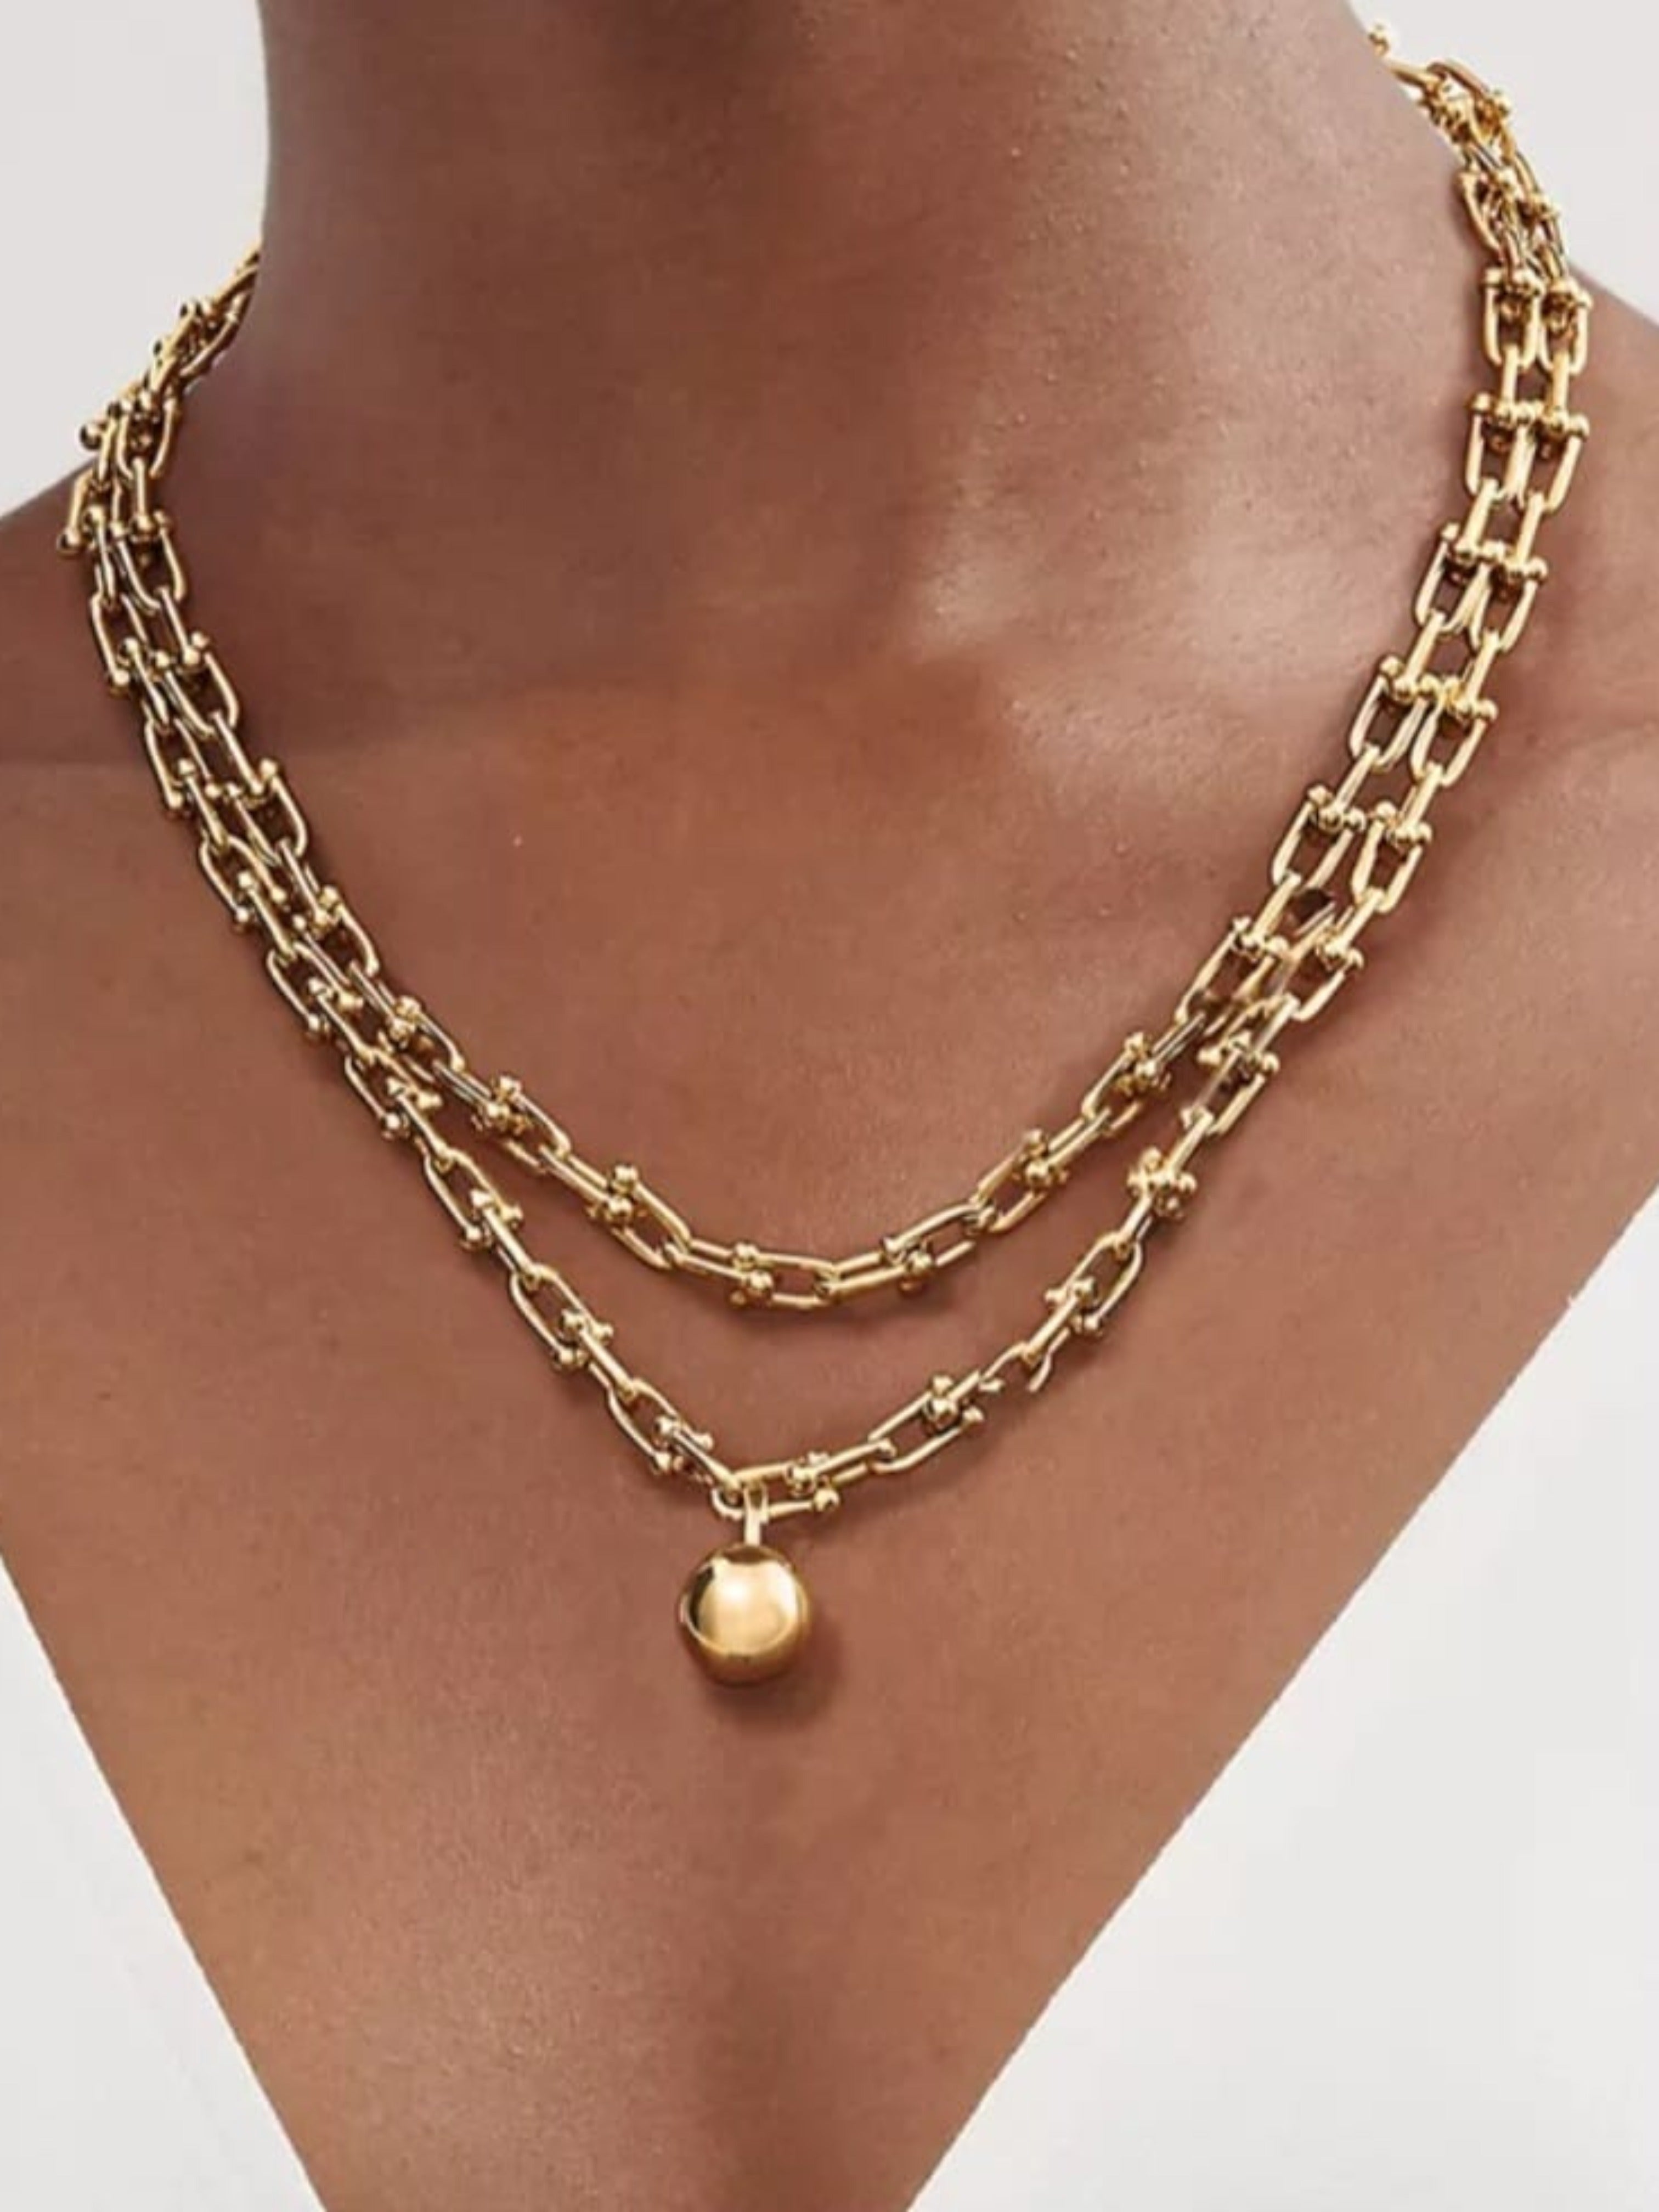 Gold Plated Chain Necklace with Ball Pendent